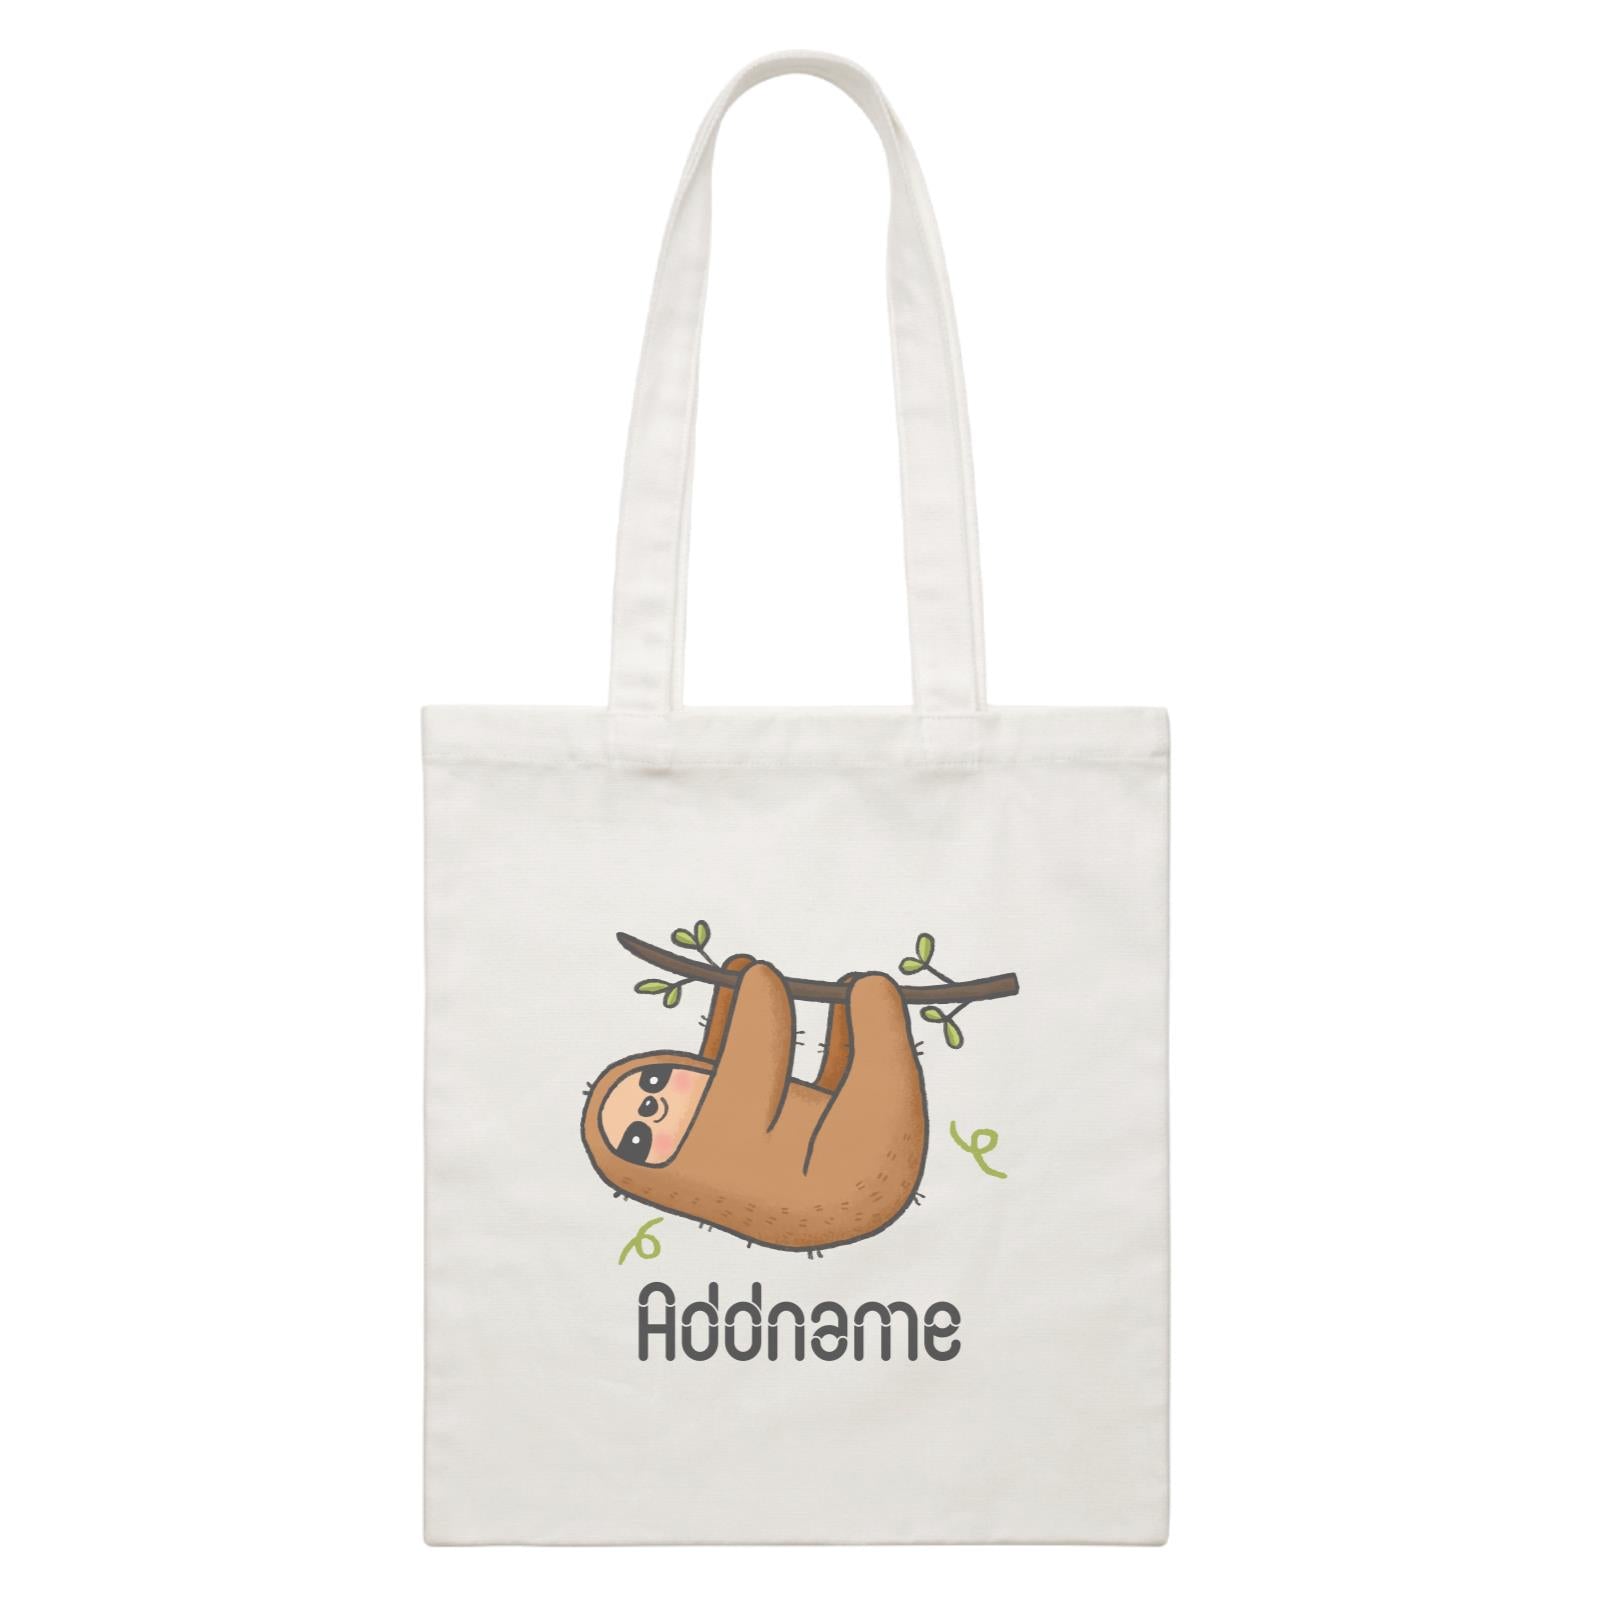 Cute Hand Drawn Style Sloth Addname White Canvas Bag